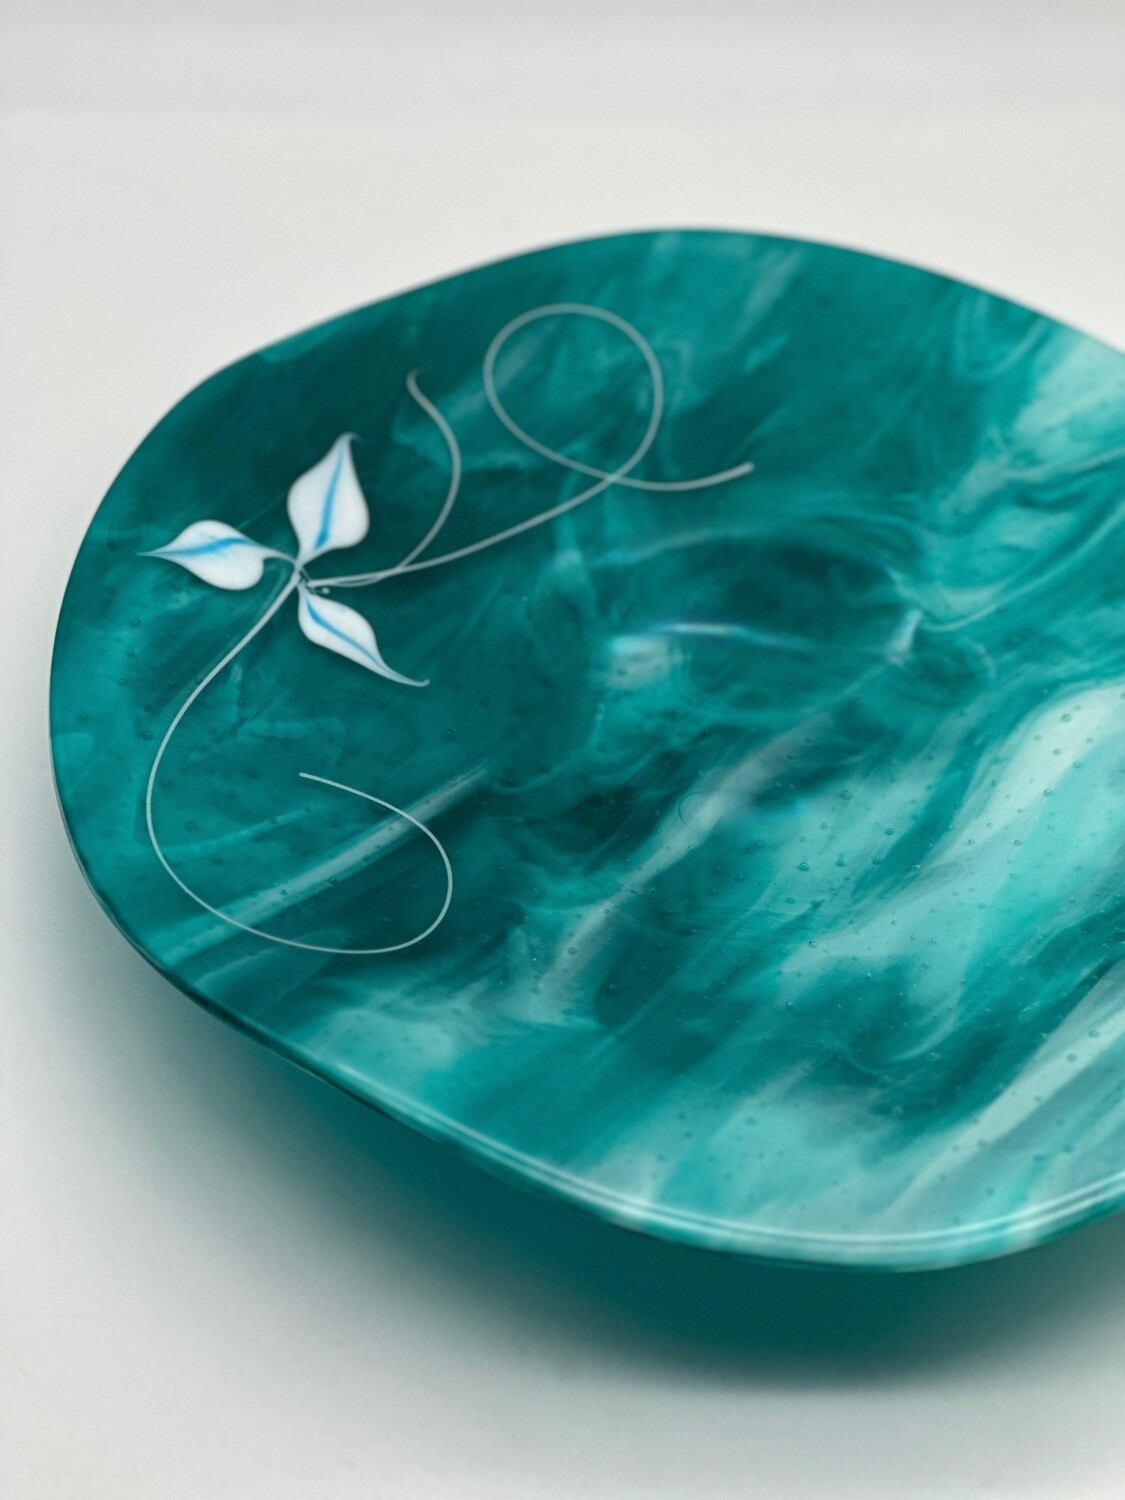 Peacock Blue Wavy Bowl with foot